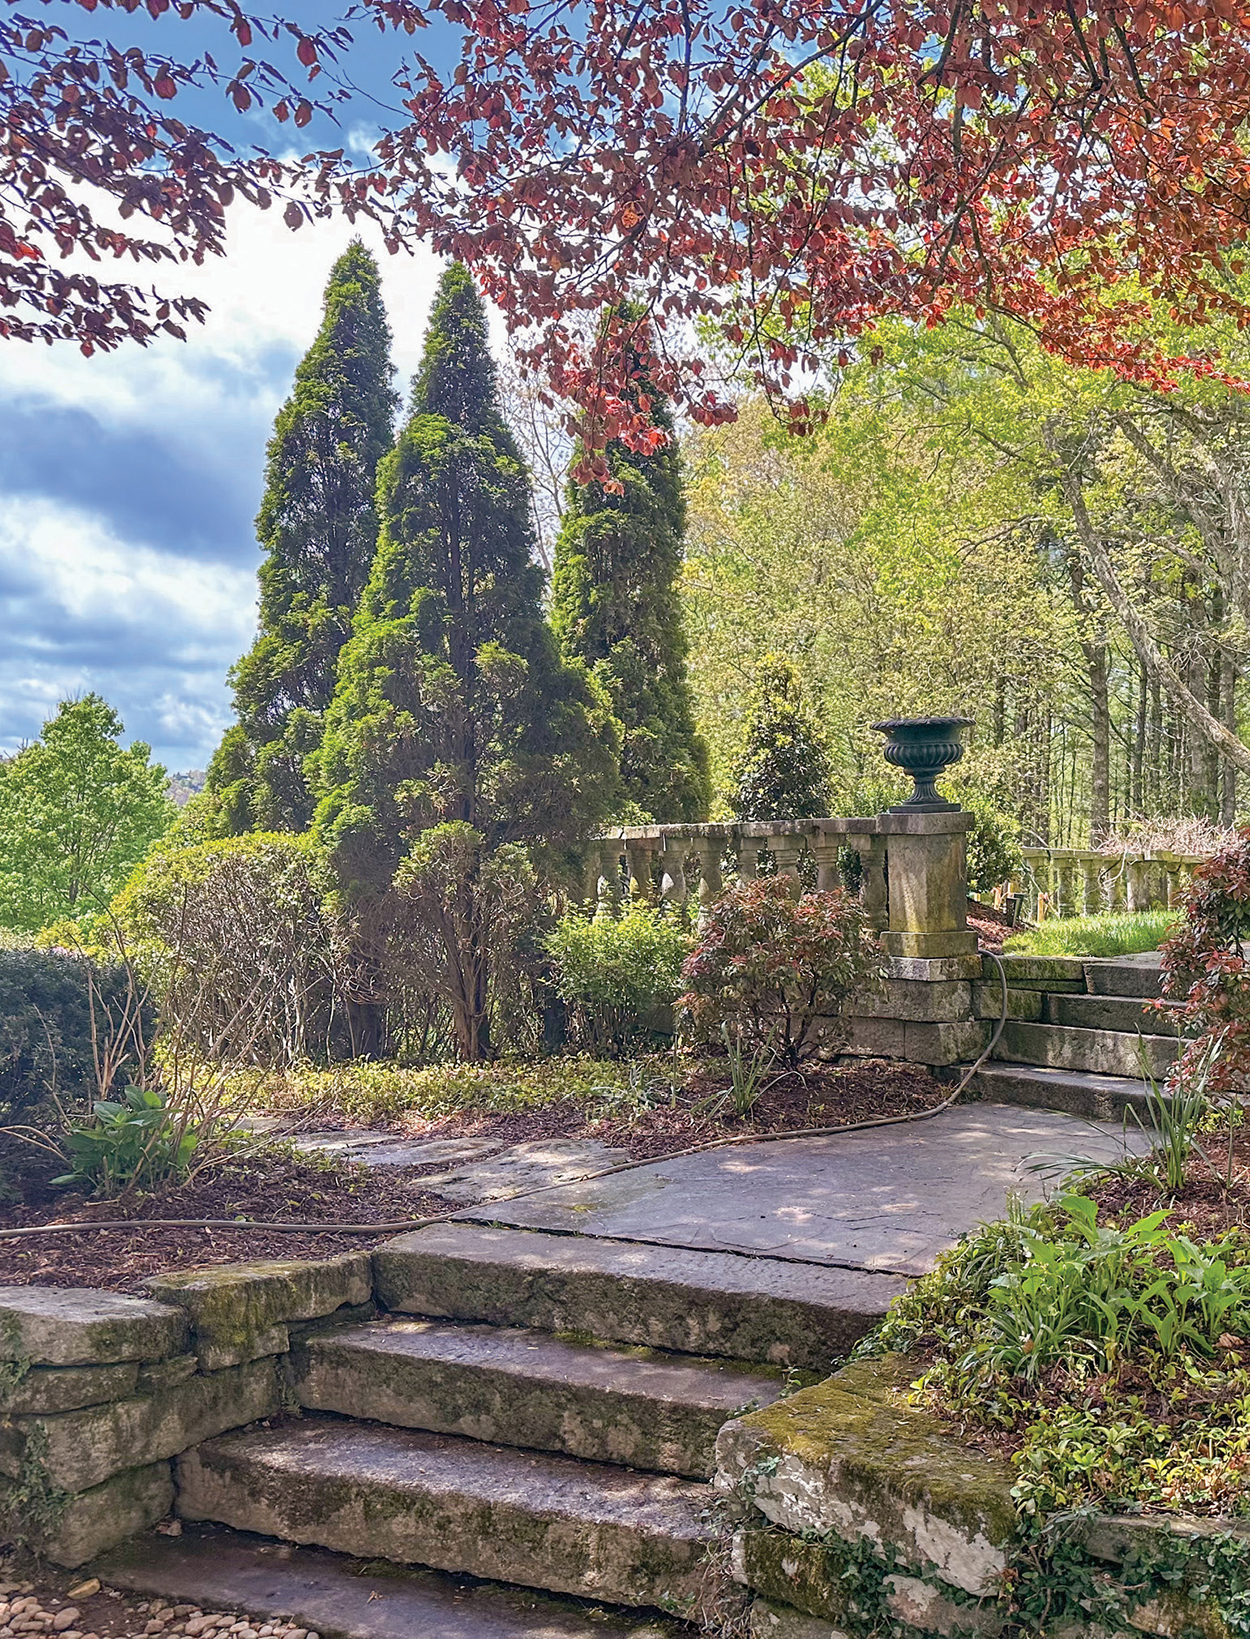 When Highlands Performing Arts Center stages its Satulah Mountain Home & Garden Tour, you can bet that it’ll be packed with entertainment and enlightenment. The tour, set for 10:00 A.M. to 3:00 P.M., Thursday, Friday, and Saturday, July 20-22 – will spotlight five stunning homes and gardens found on Historic Satulah Mountain, never before opened to the public. Tickets are available for the morning or afternoon and at $125 each. The last shuttle leaves PAC at 2:00 P.M. The homes represent a wide variety of architectural designs and interiors. The gardens are considered among the finest in the region, with mature native and introduced plant species. For instance, tour members will visit the home and gardens of Cathy Henson and Chris Carpenter, purchased in 2004. In 2005 they had the opportunity to purchase an adjacent parcel – the long-neglected gardens in the heart of the old historic district of Satulah Mountain created by New Orleans cotton broker Henry Worrell Sloan. Also included on the tour is Chetolah. Located on the western face of Satulah Mountain, it’s the original home of Henry Martin Bascom, the second mayor of Highlands. Built in 1892, this American Foursquare home was constructed on a three-acre lot purchased from his mother-in-law, Mrs. Amanda Davis. Between 1894 and 1916, Bascom purchased several adjoining lots, culminating in twenty acres of privacy and a near 360-degree view of the surrounding mountains. The American Foursquare design is meant to maximize floor space within a narrow footprint, which worked well in early urban neighborhoods and streetcar suburbs. That’s why Mayor Bascom’s Foursquare is so unique: a simple, urban design perched high on a mountain slope. Even more unique was Bascom’s inclusion of a wood-burning furnace in the basement. It was the first home in Highlands to have central heating. In 2018, Chetolah was rescued by the skill and vision of Highlands designer Darren Whatley and his spouse, David Moore. In a matter of months, they restored and updated the house while respecting the original design integrity of the home and by preserving the character and historical significance of Chetolah. If you’d like to tour these exclusive gardens and homes, sign up for the tour by visiting highlandsperformingarts.com or calling (828) 526-9047. Highlands PAC will offer shuttle service from its 507 Chestnut Street location – private cars will not be allowed. There will be golf carts available to anyone who needs assistance. Everyone should wear comfy, durable shoes. The event is sponsored by Bock Builders, MHK Architecture, Laurel Magazine, Suncoast Equity Management, and Berkshire Hathaway.